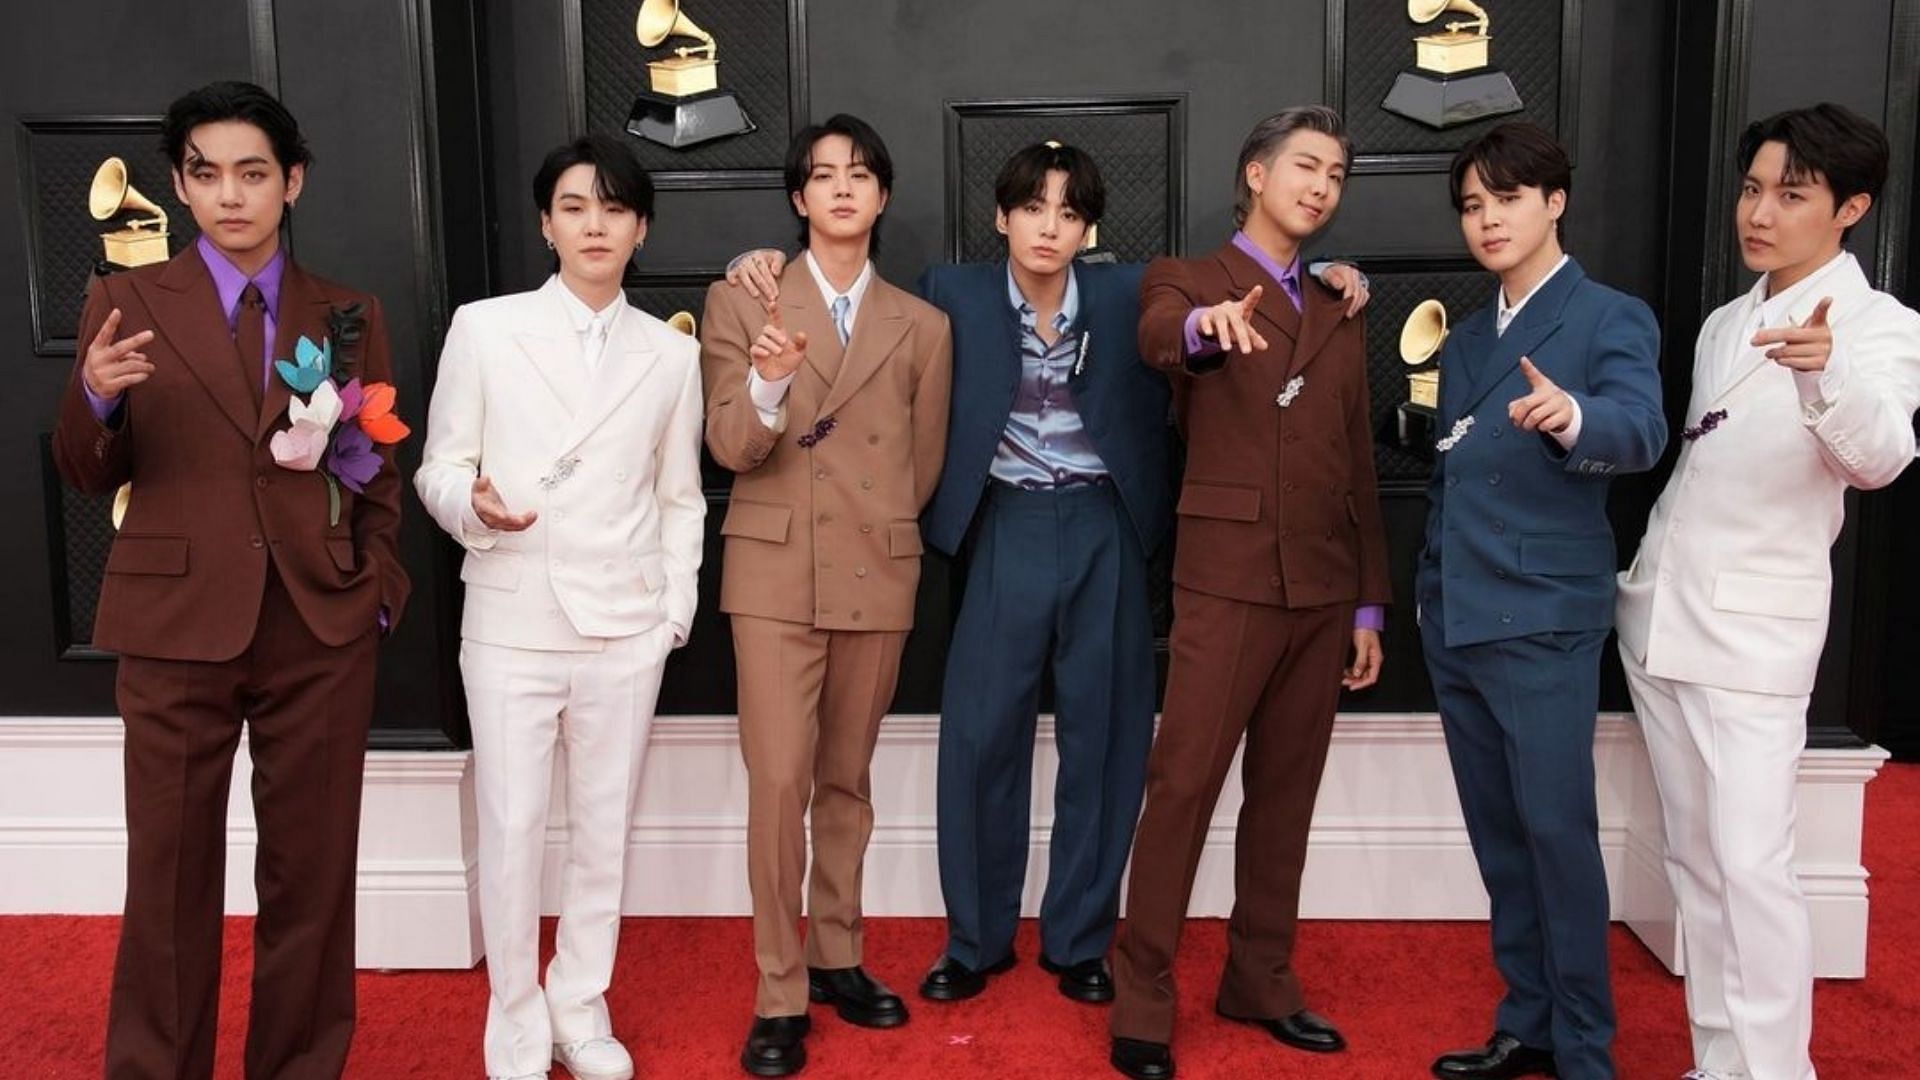 BTS' Spy-Themed Performance of “Butter” at the Grammys 2022 Is Everything